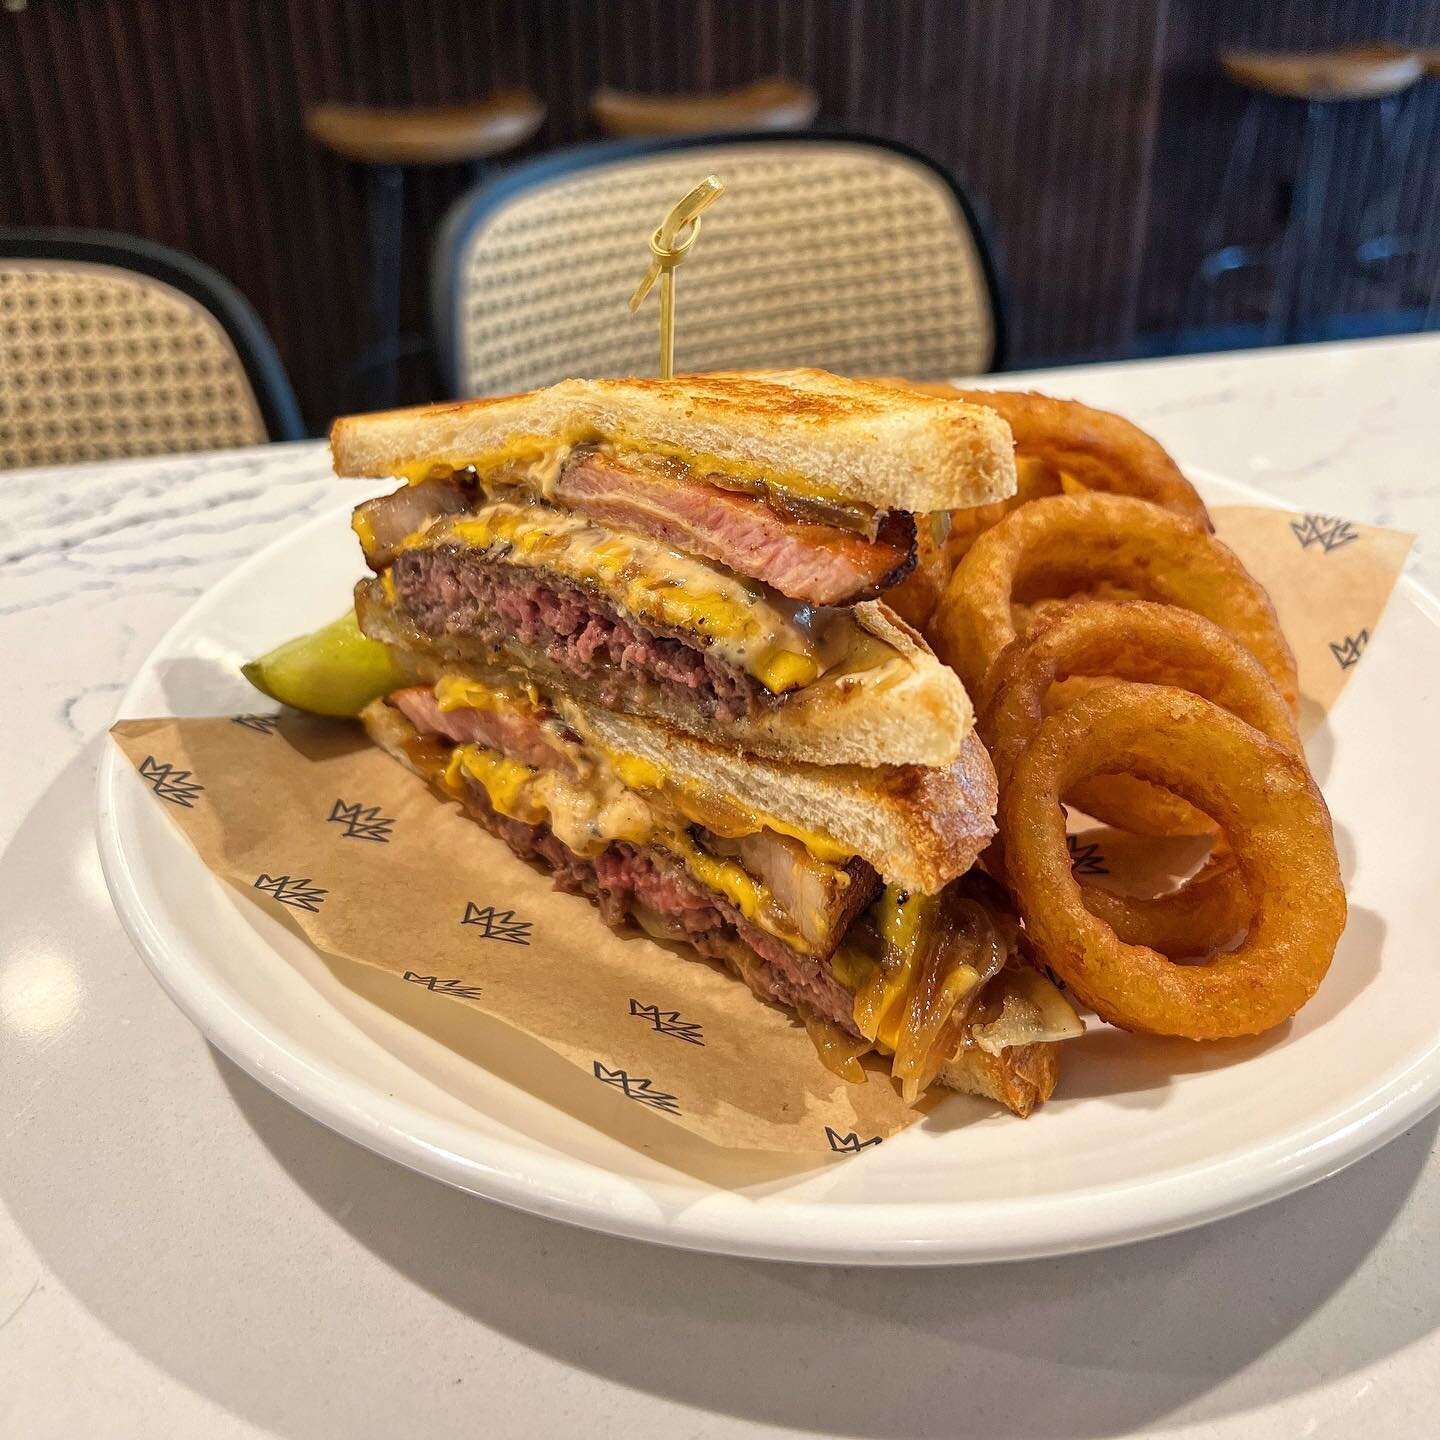 Tonight&rsquo;s Patty Melt special with Comte, American, Haus Sauce and a side of onion rings is 🔥. Have a great weekend, friends!